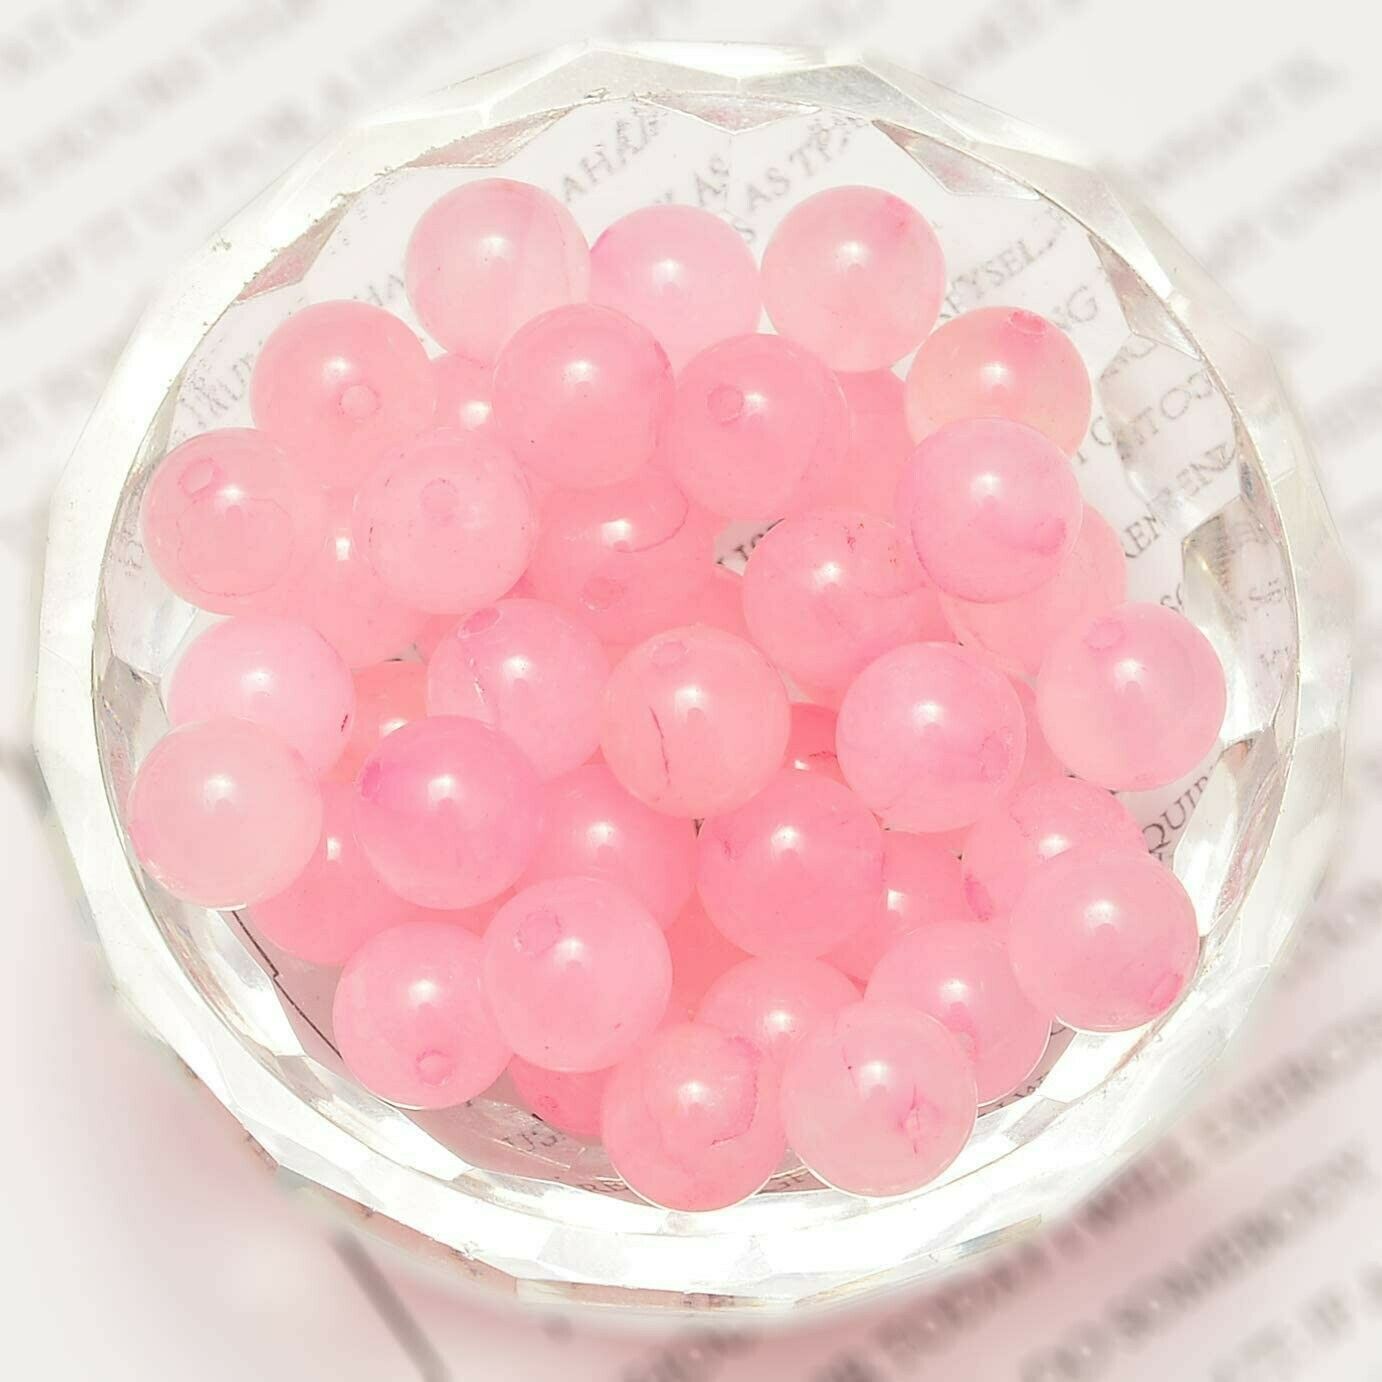 Moments Of Beauty - 20 rose quartz gemstone beads 8mm pink natural jewelry making supplies